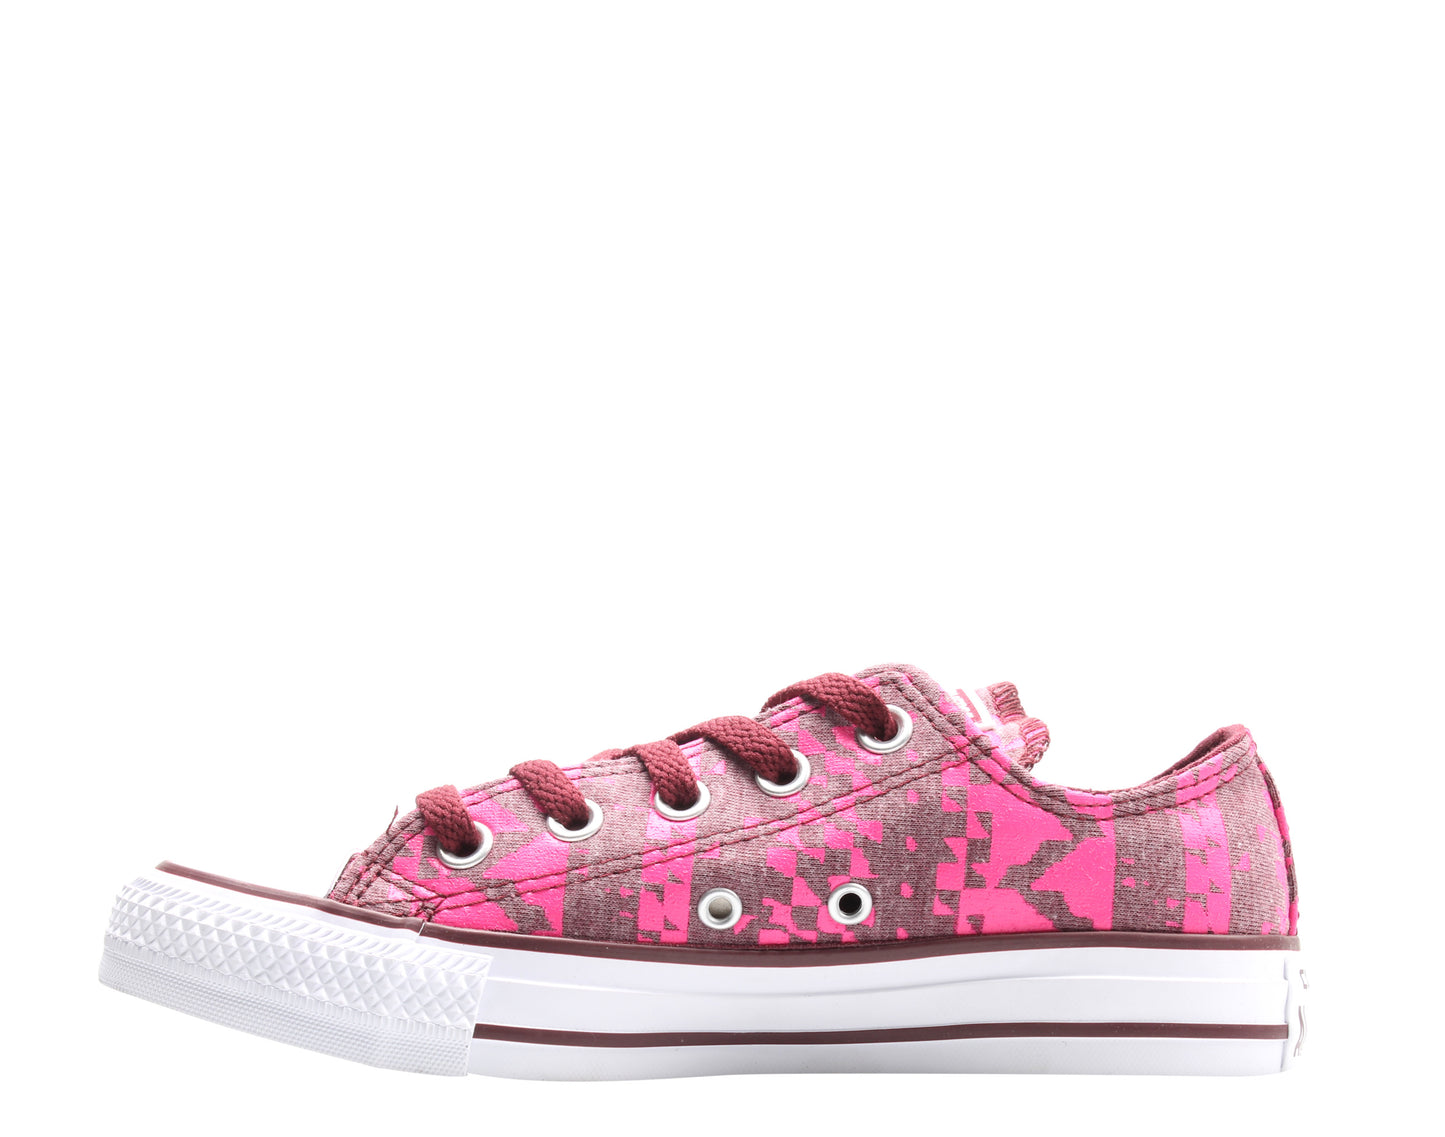 Converse Chuck Taylor All Star Ox Print Bordeaux/Pink Women's Sneakers 549683C